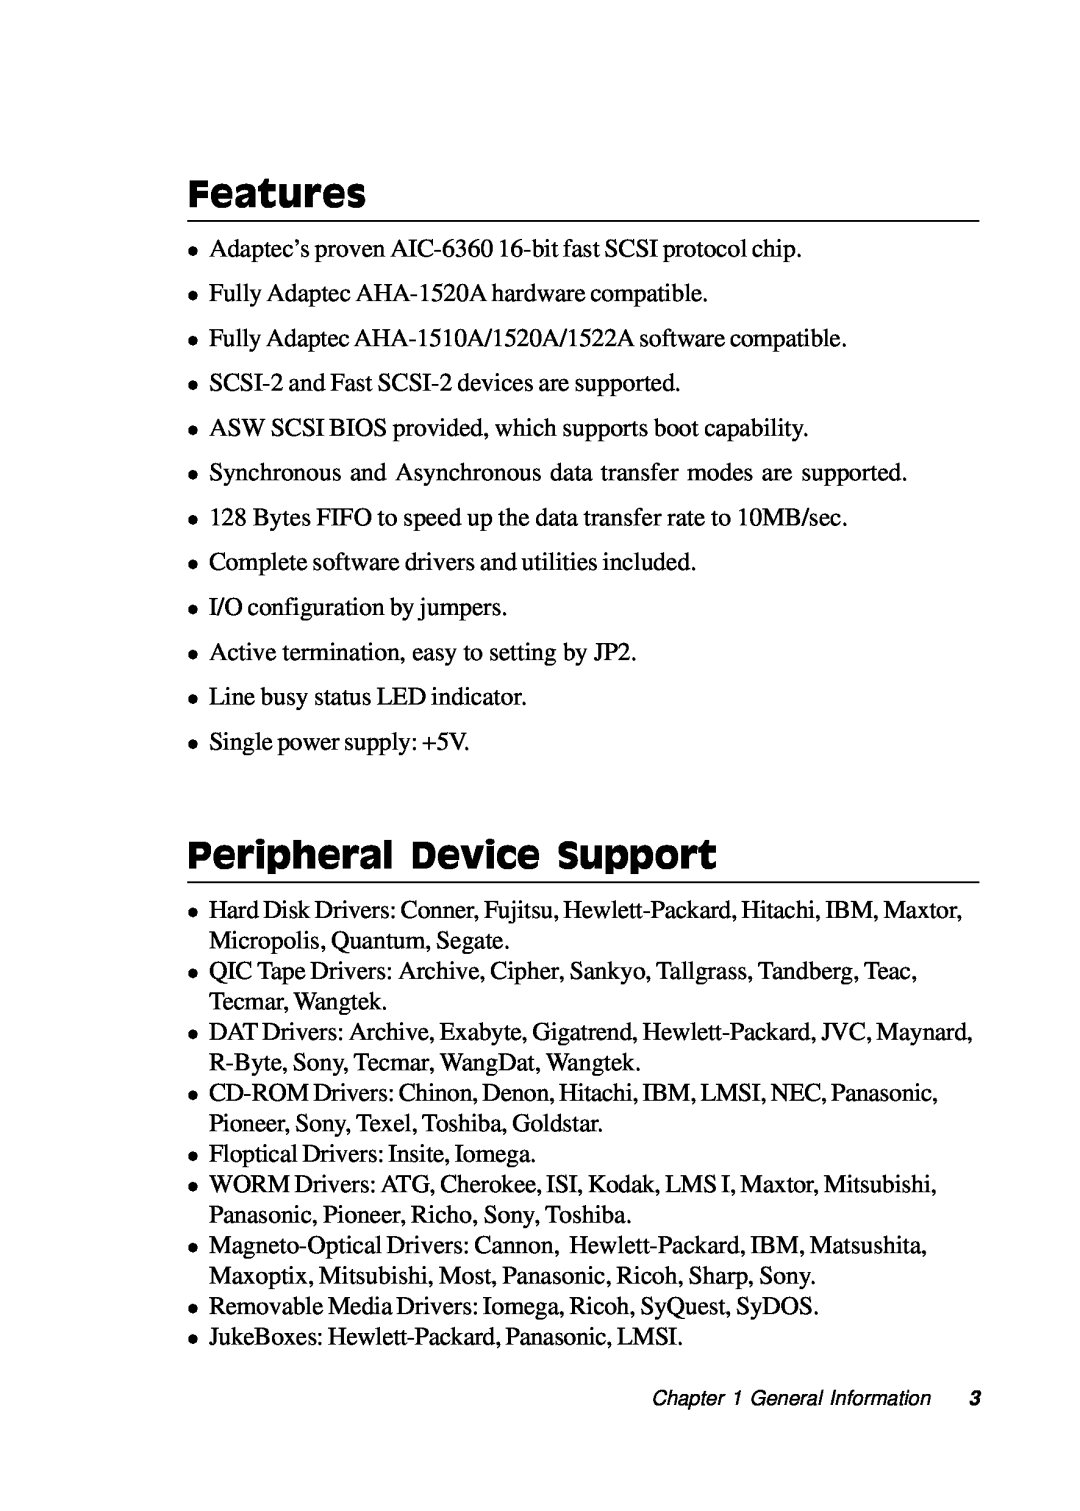 Adaptec PC/104, PCM-3420 manual Features, Peripheral Device Support 